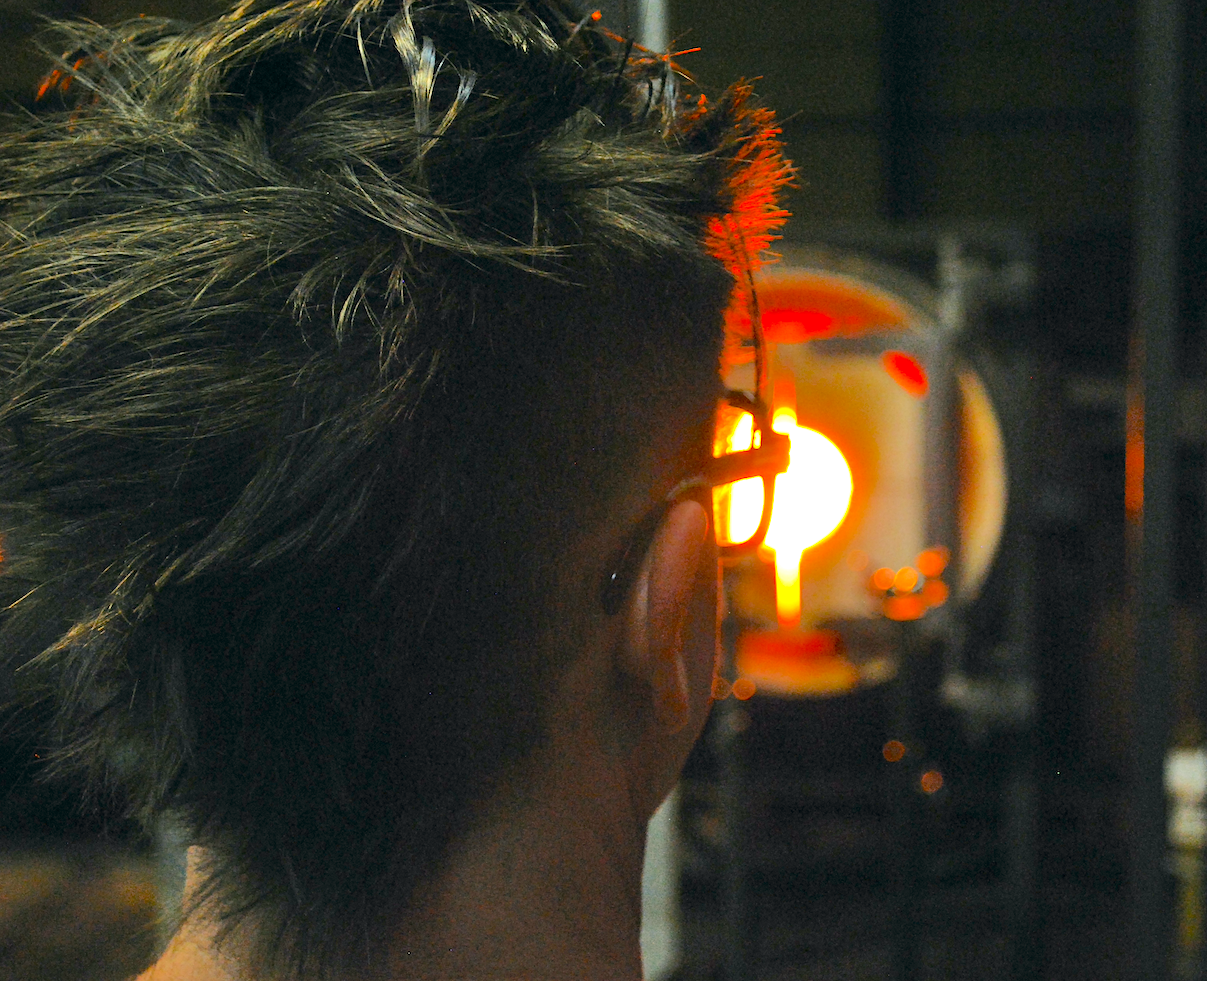 Picture of the back of someones head in a glass blowing studio